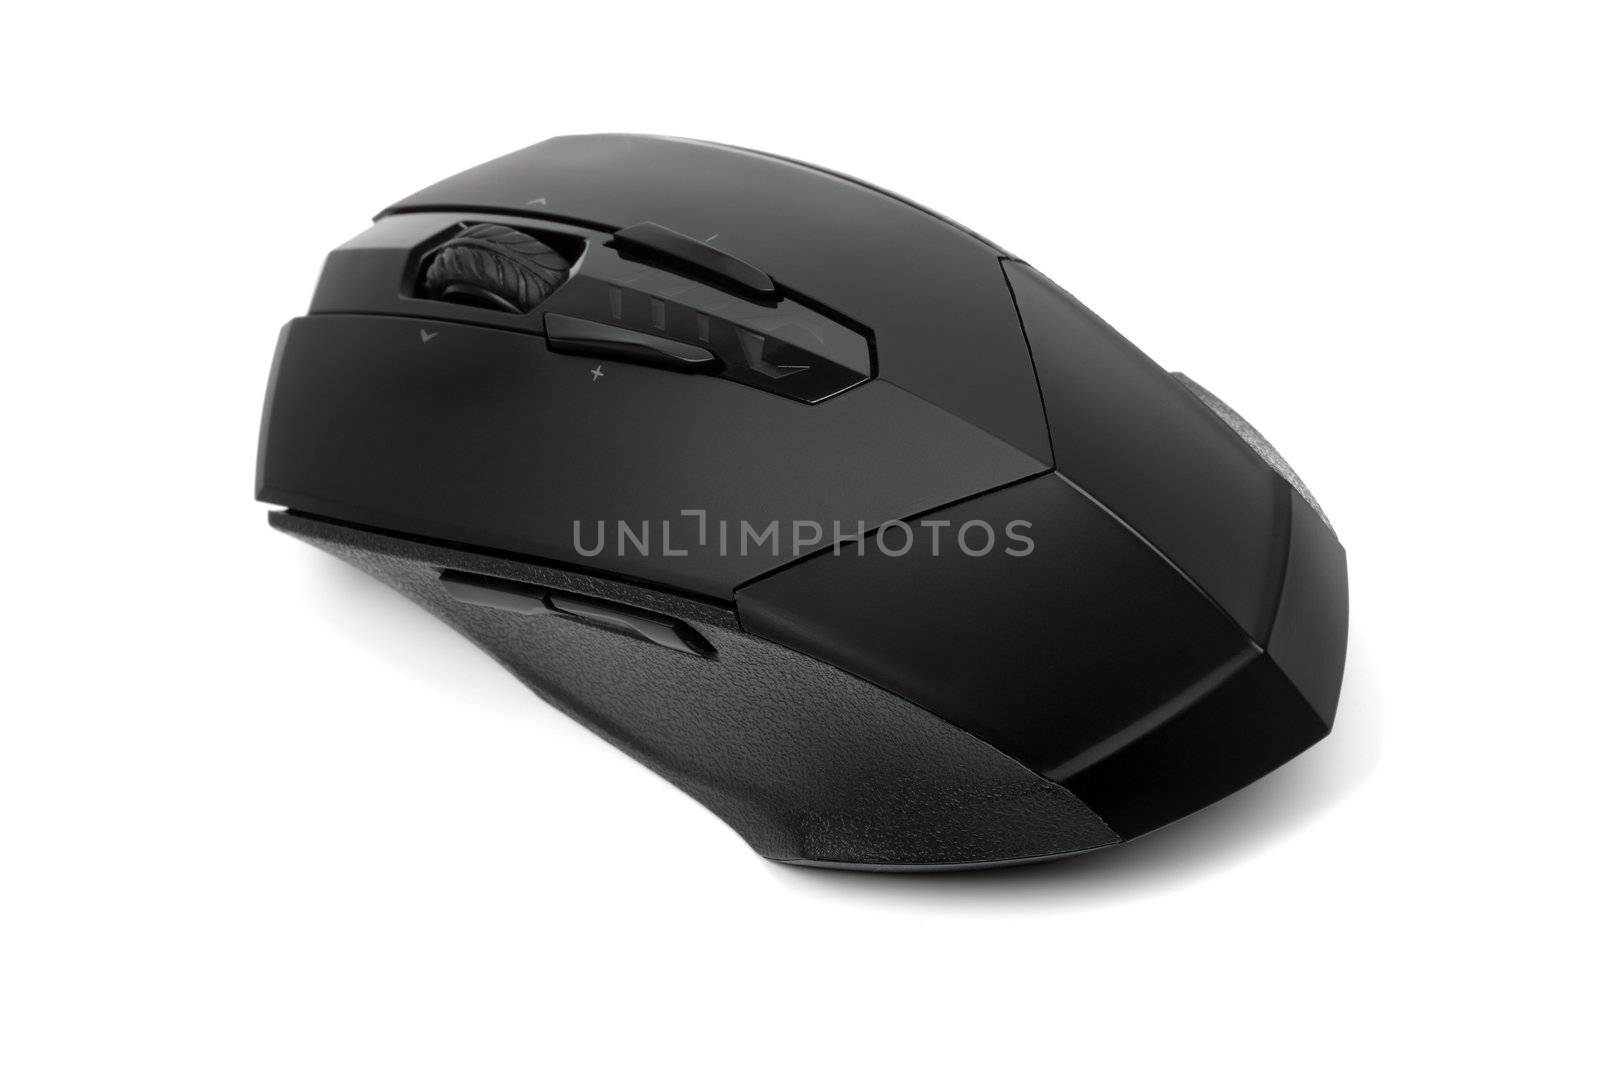 High quality professional laser mouse for gamers or graphics iso by borodaev